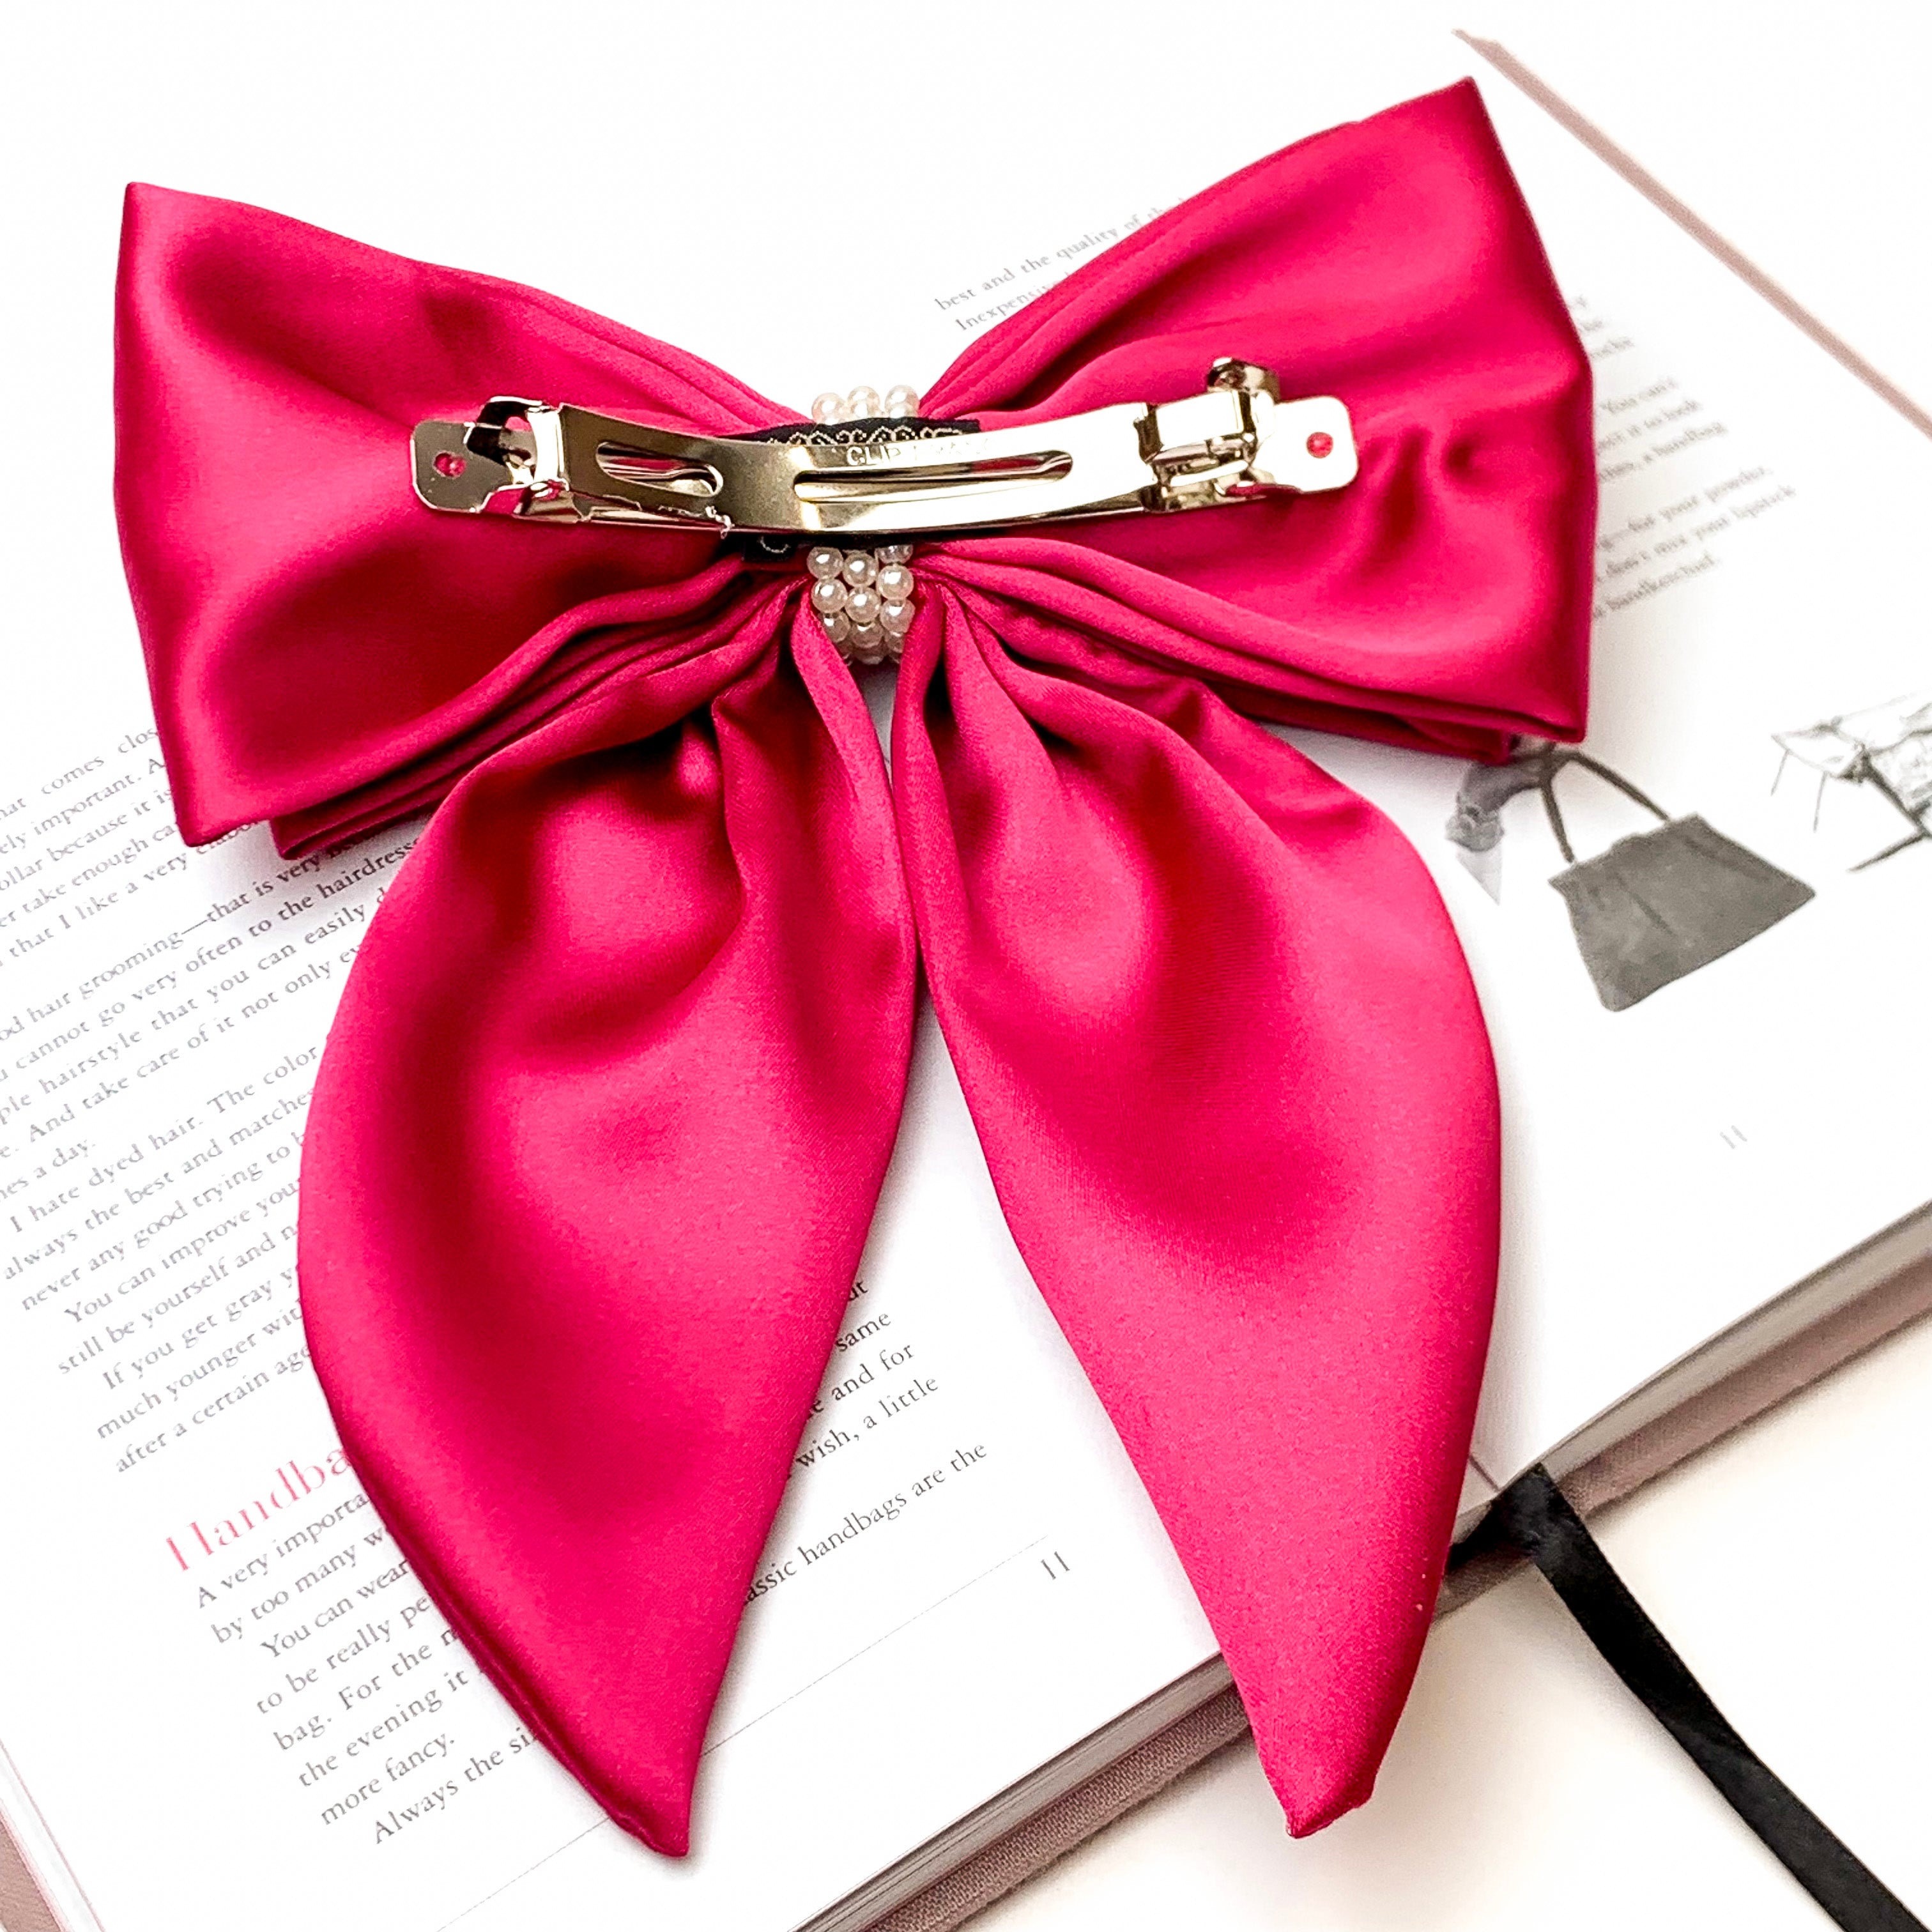 Miss Me Layered Bow with Pearl Center in Fuchsia Pink